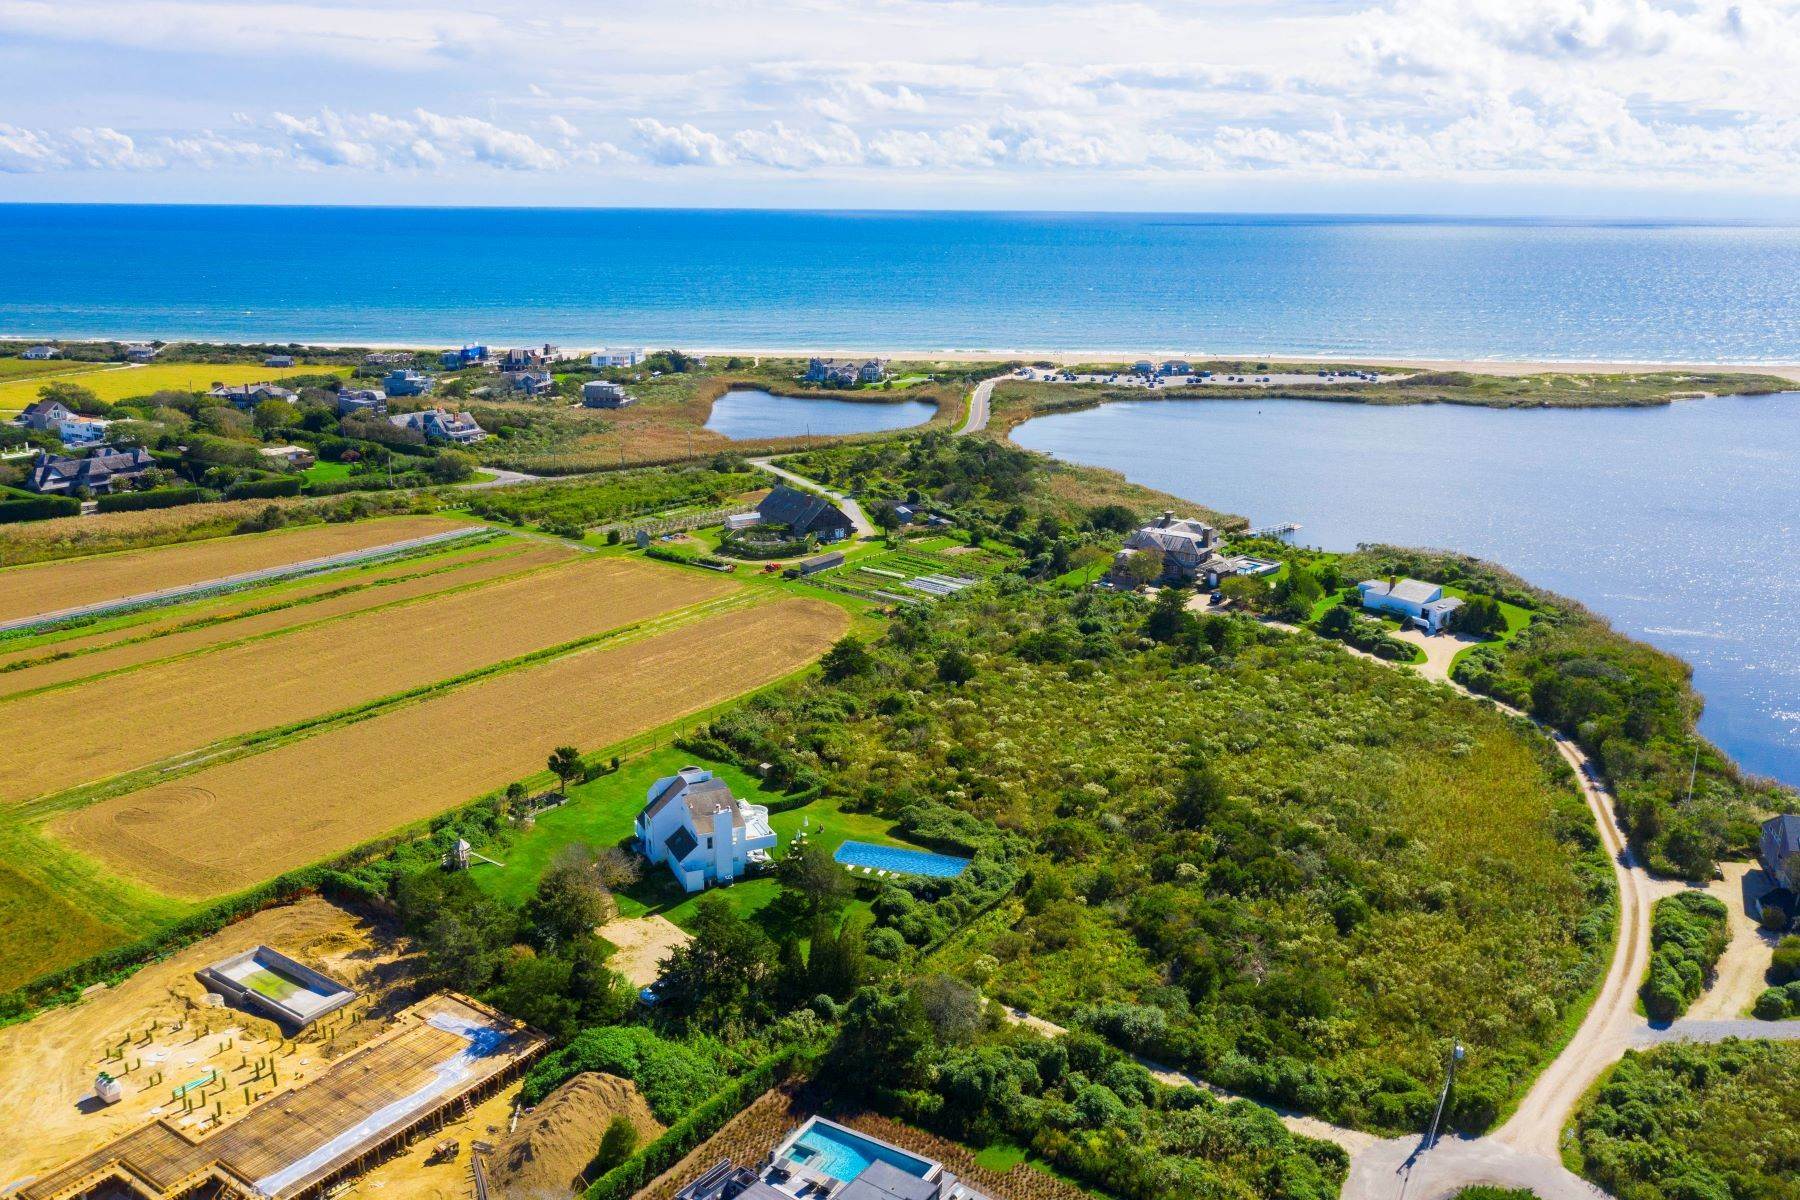 Single Family Homes for Sale at Beach house with panoramic water views 149 Seascape Lane Sagaponack, New York 11962 United States